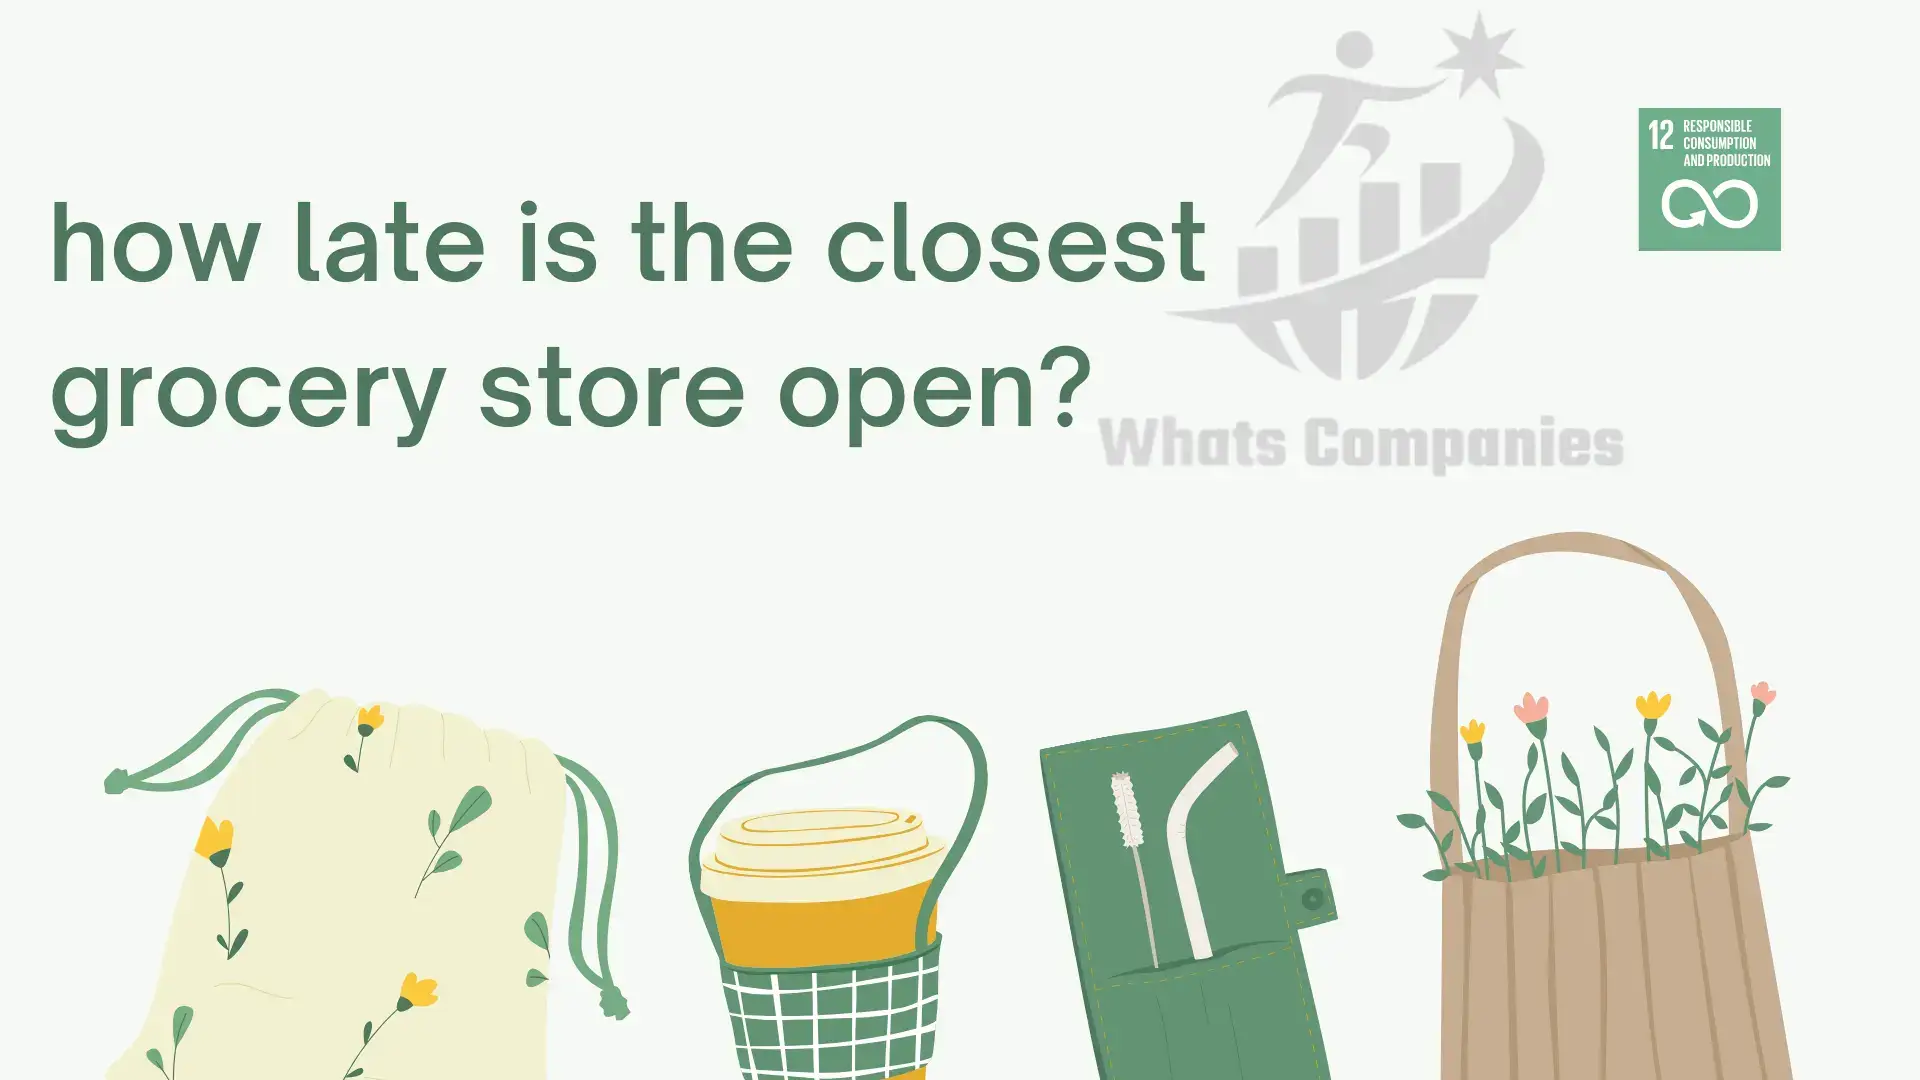 how late is the closest grocery store open?